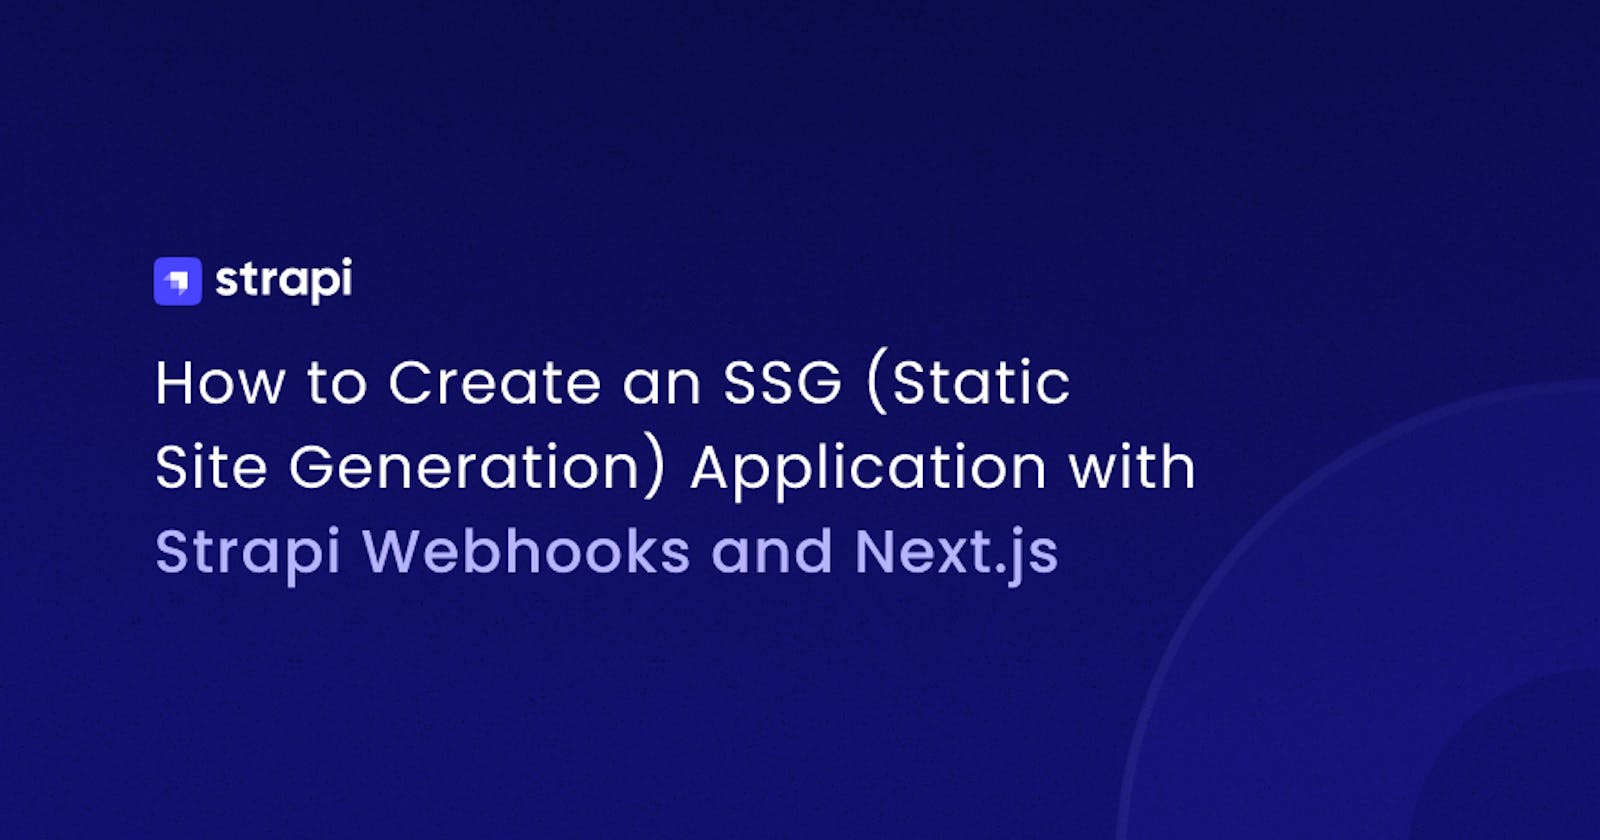 How to Create an SSG (Static Site Generation) Application with Strapi Webhooks and NextJs